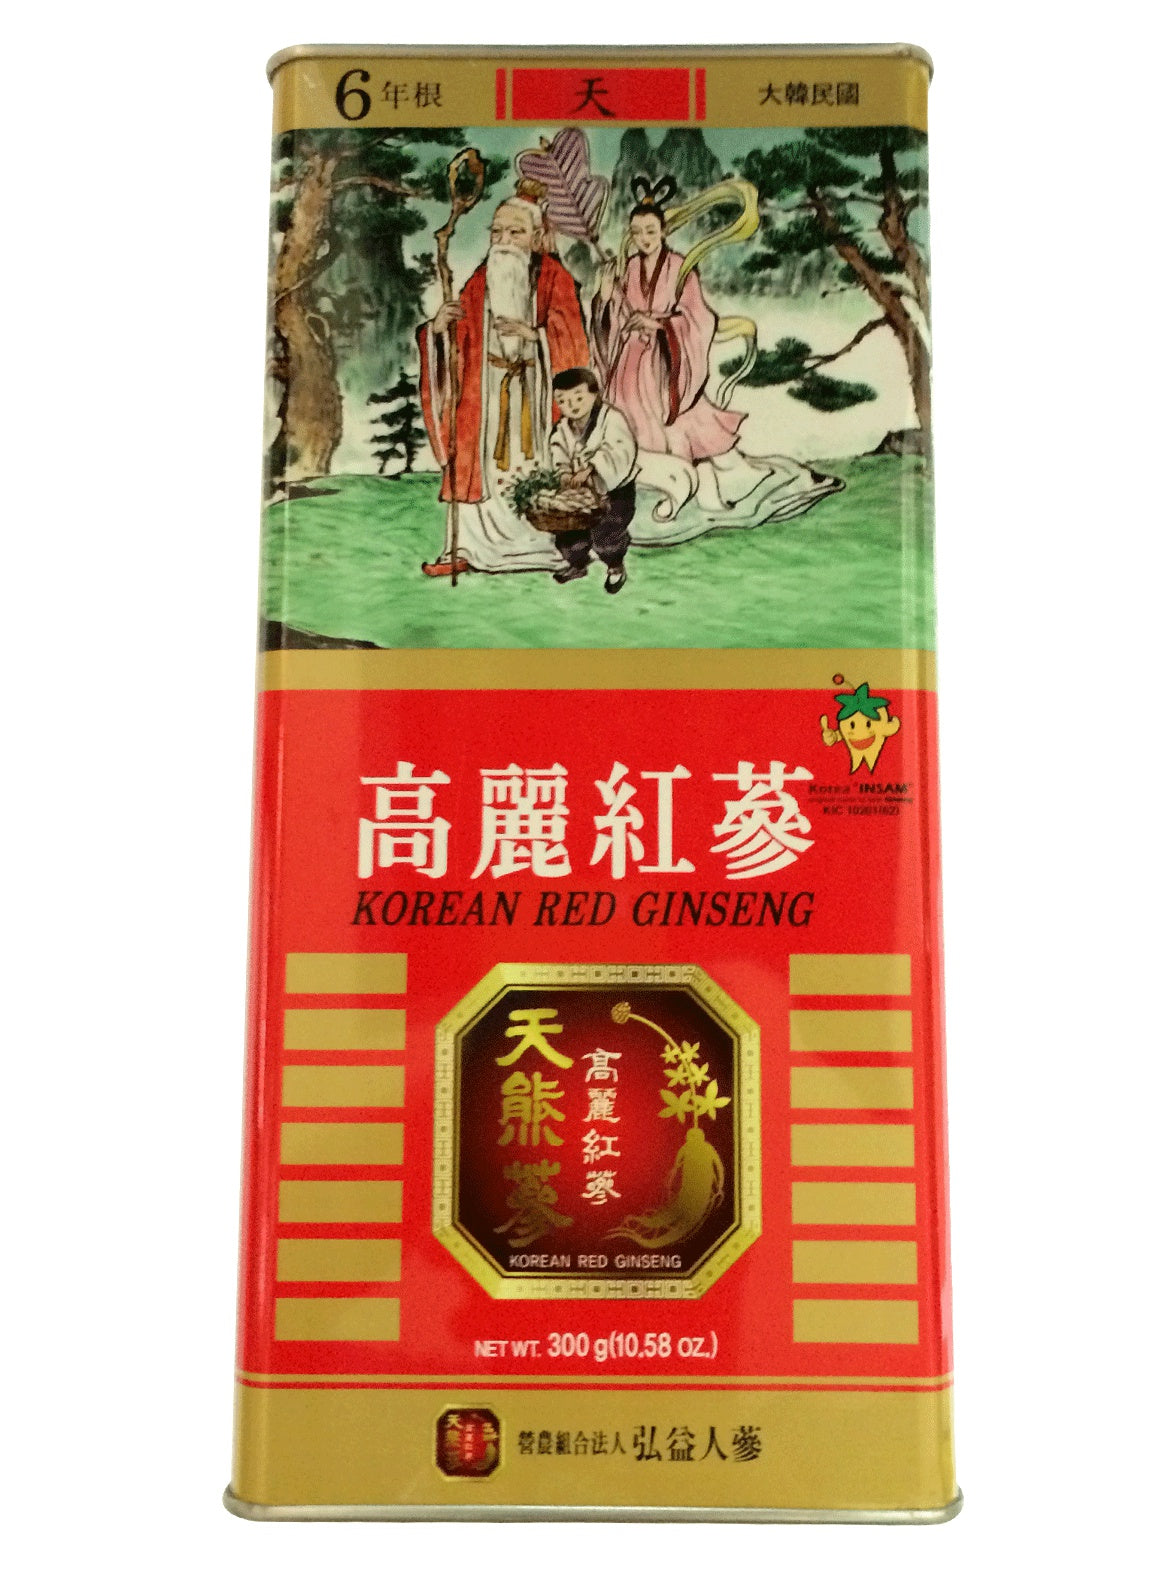 6 Years Korean Red Ginseng Roots 300g Canned 天蔘 [15 roots]